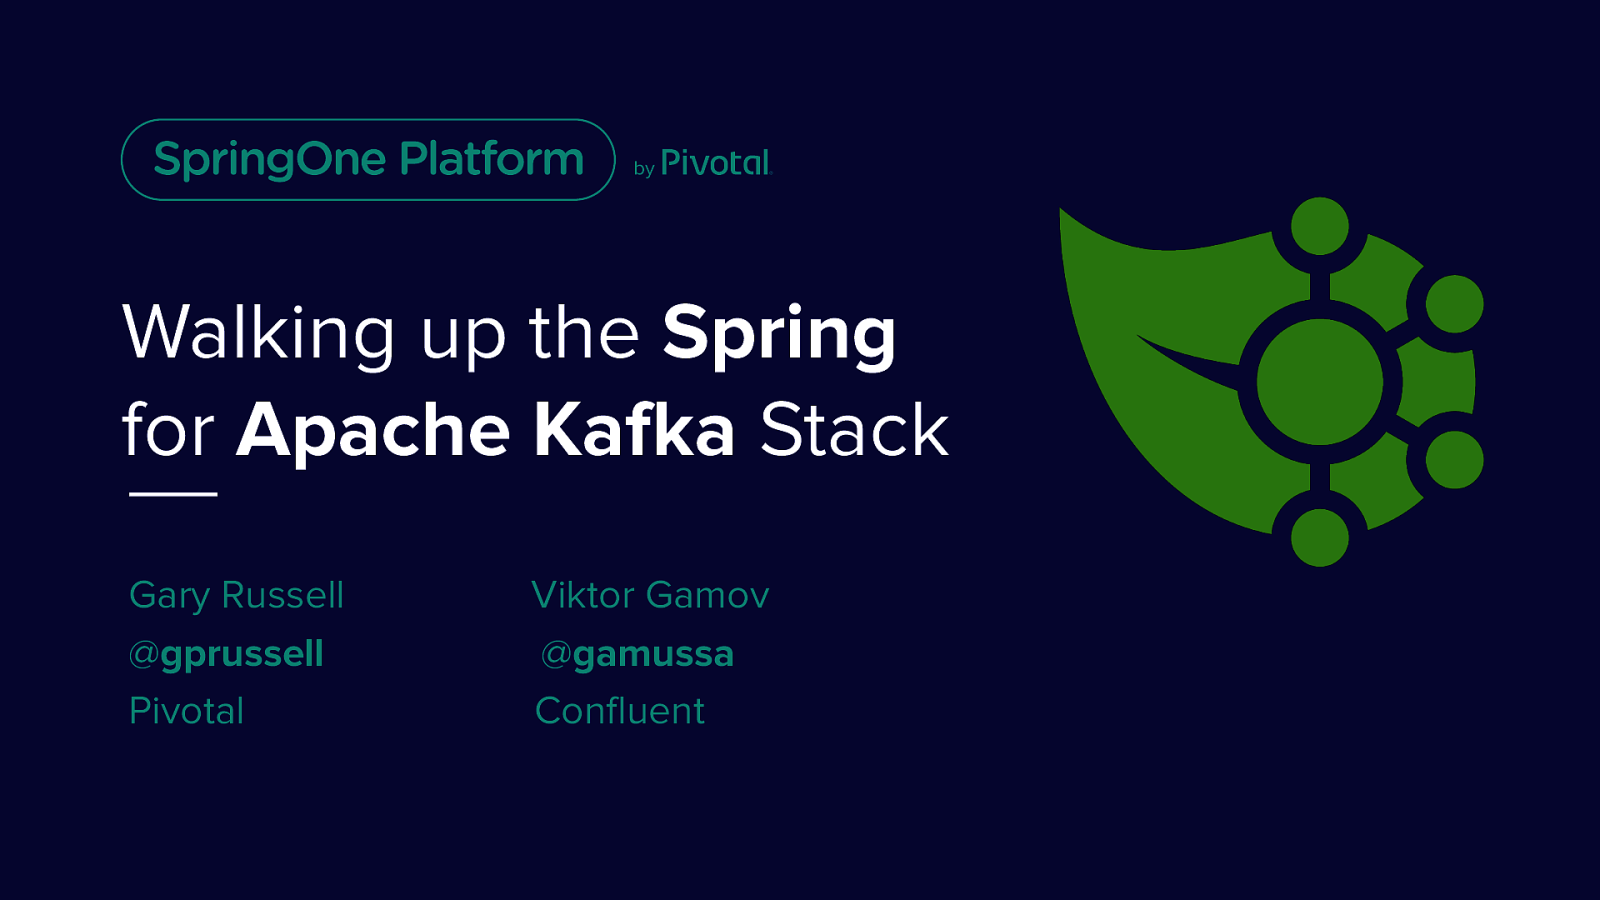 Walking up the Spring for Apache Kafka Stack